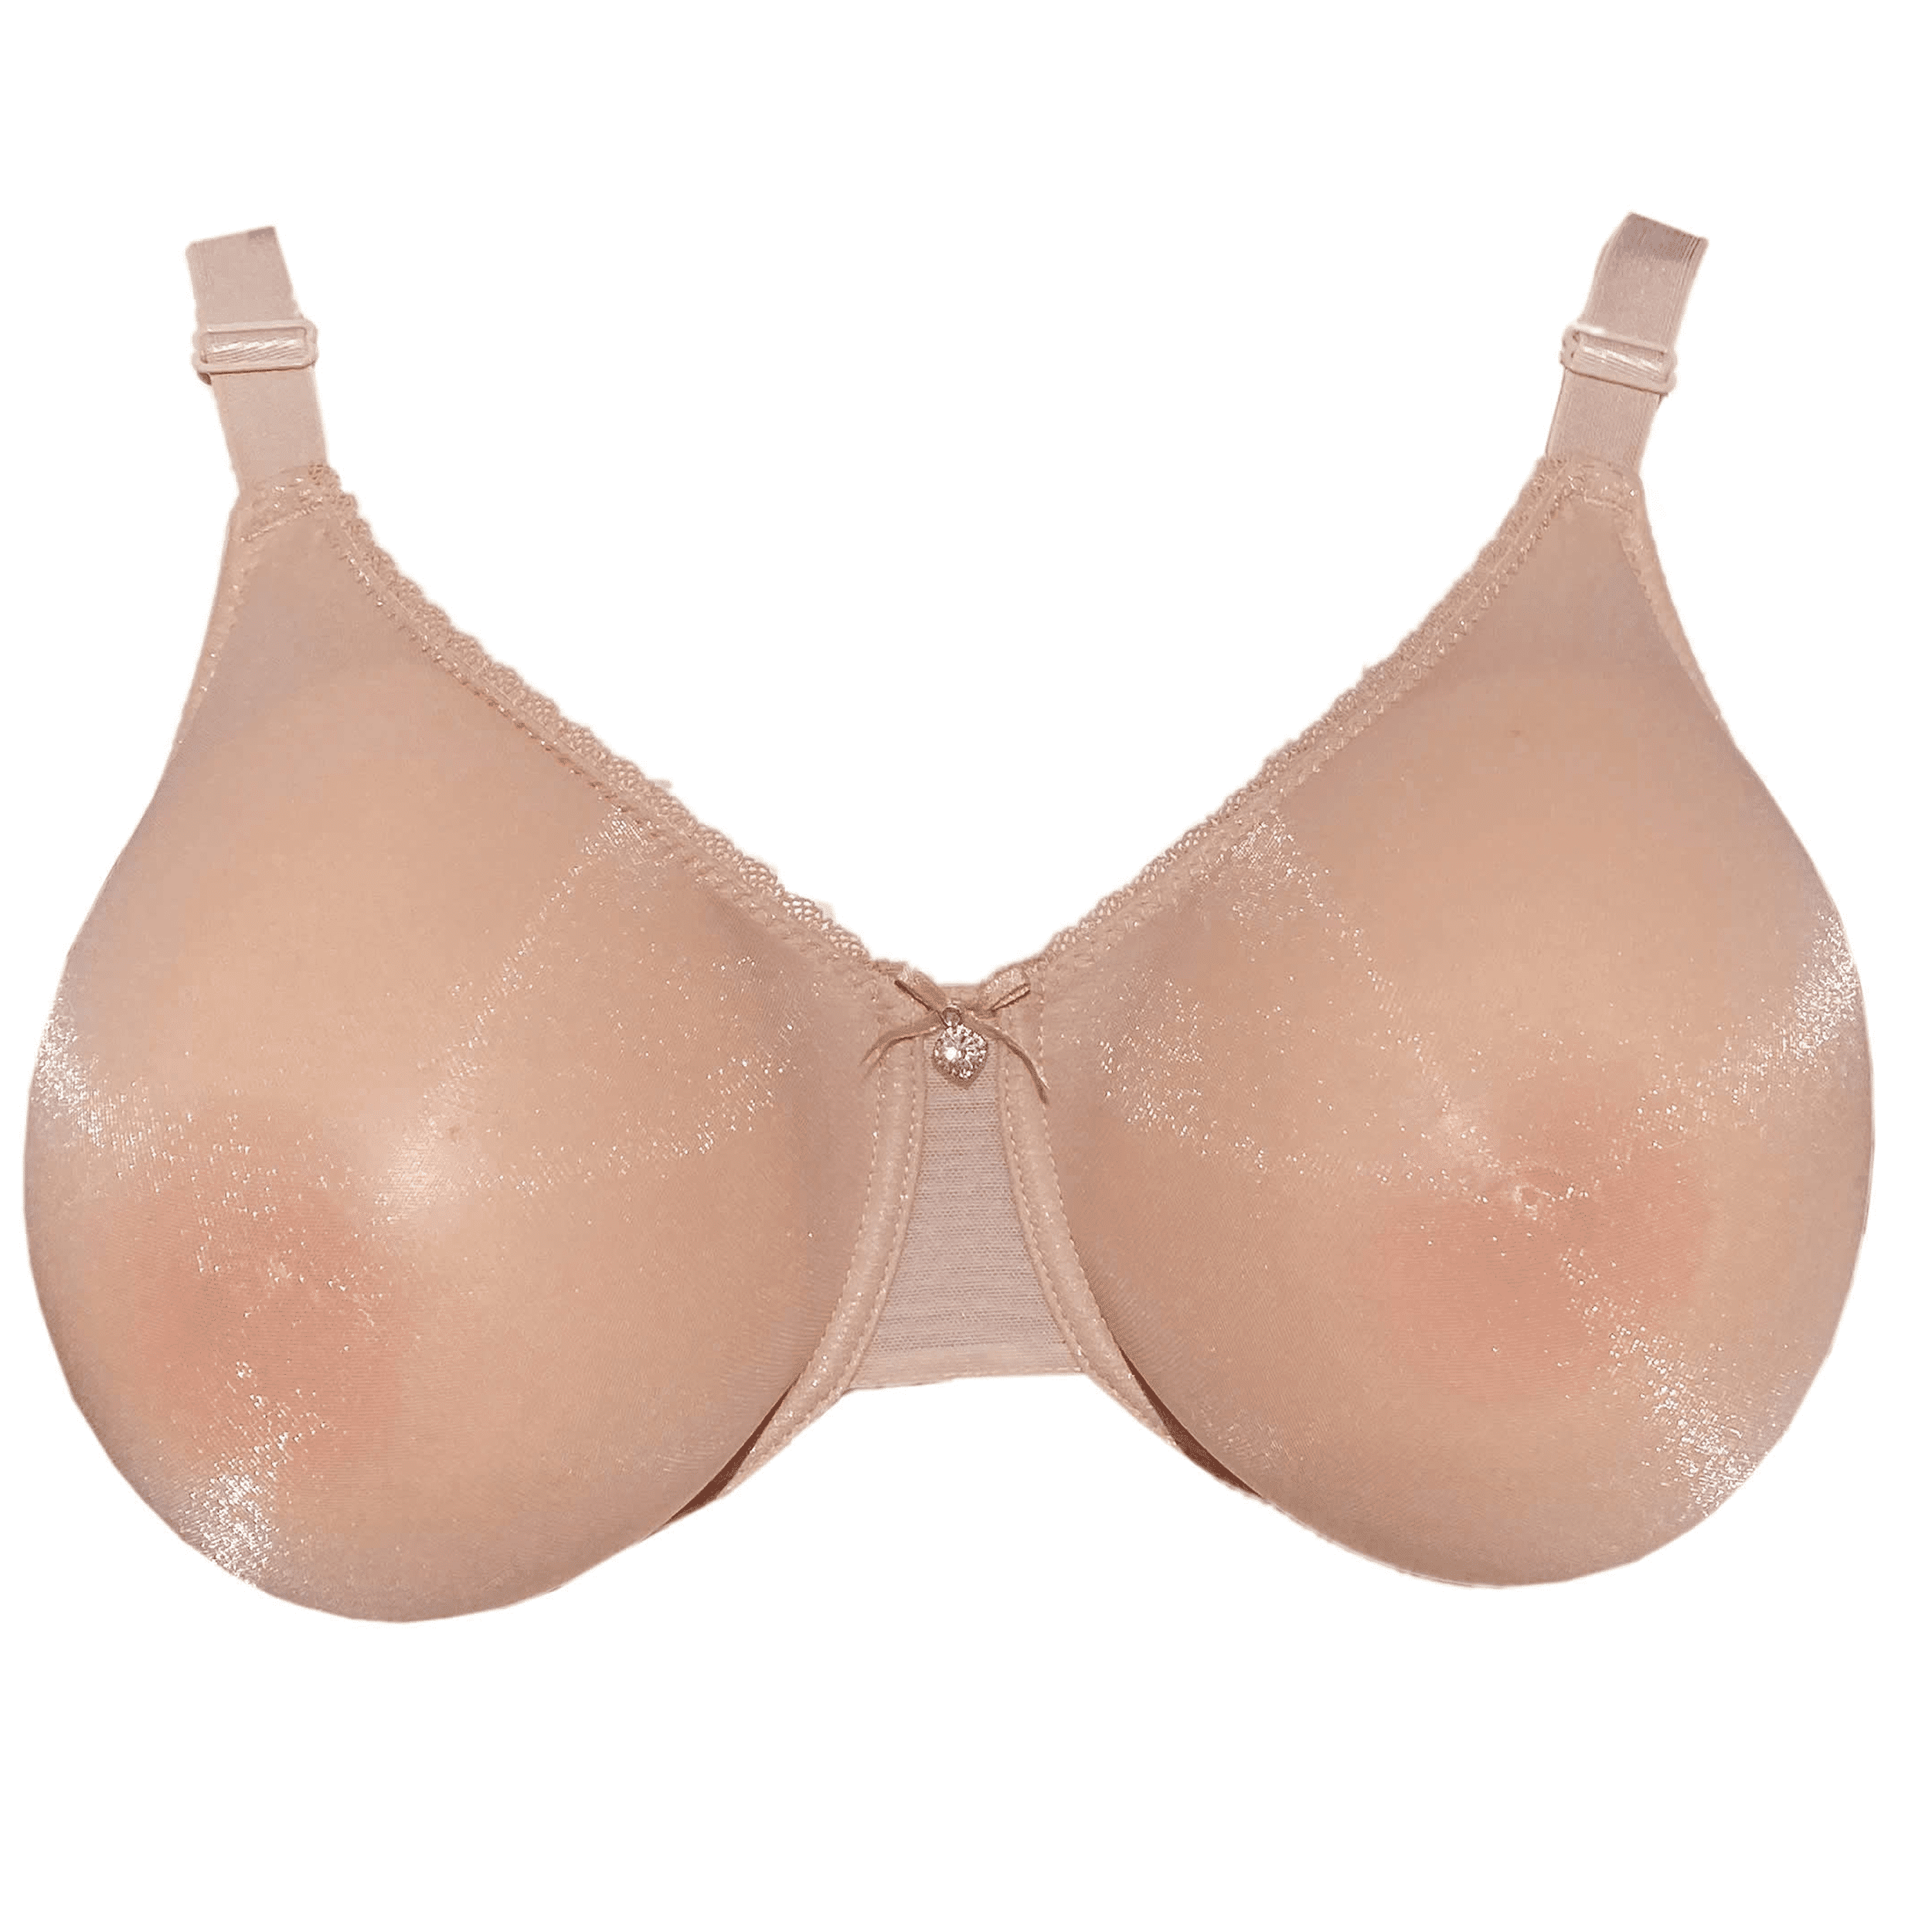 BIMEI See Through Bra CD Mastectomy Lingerie Bra Silicone Breast Forms  Prosthesis Pocket Bra with Steel Ring 9008,Beige,36B 